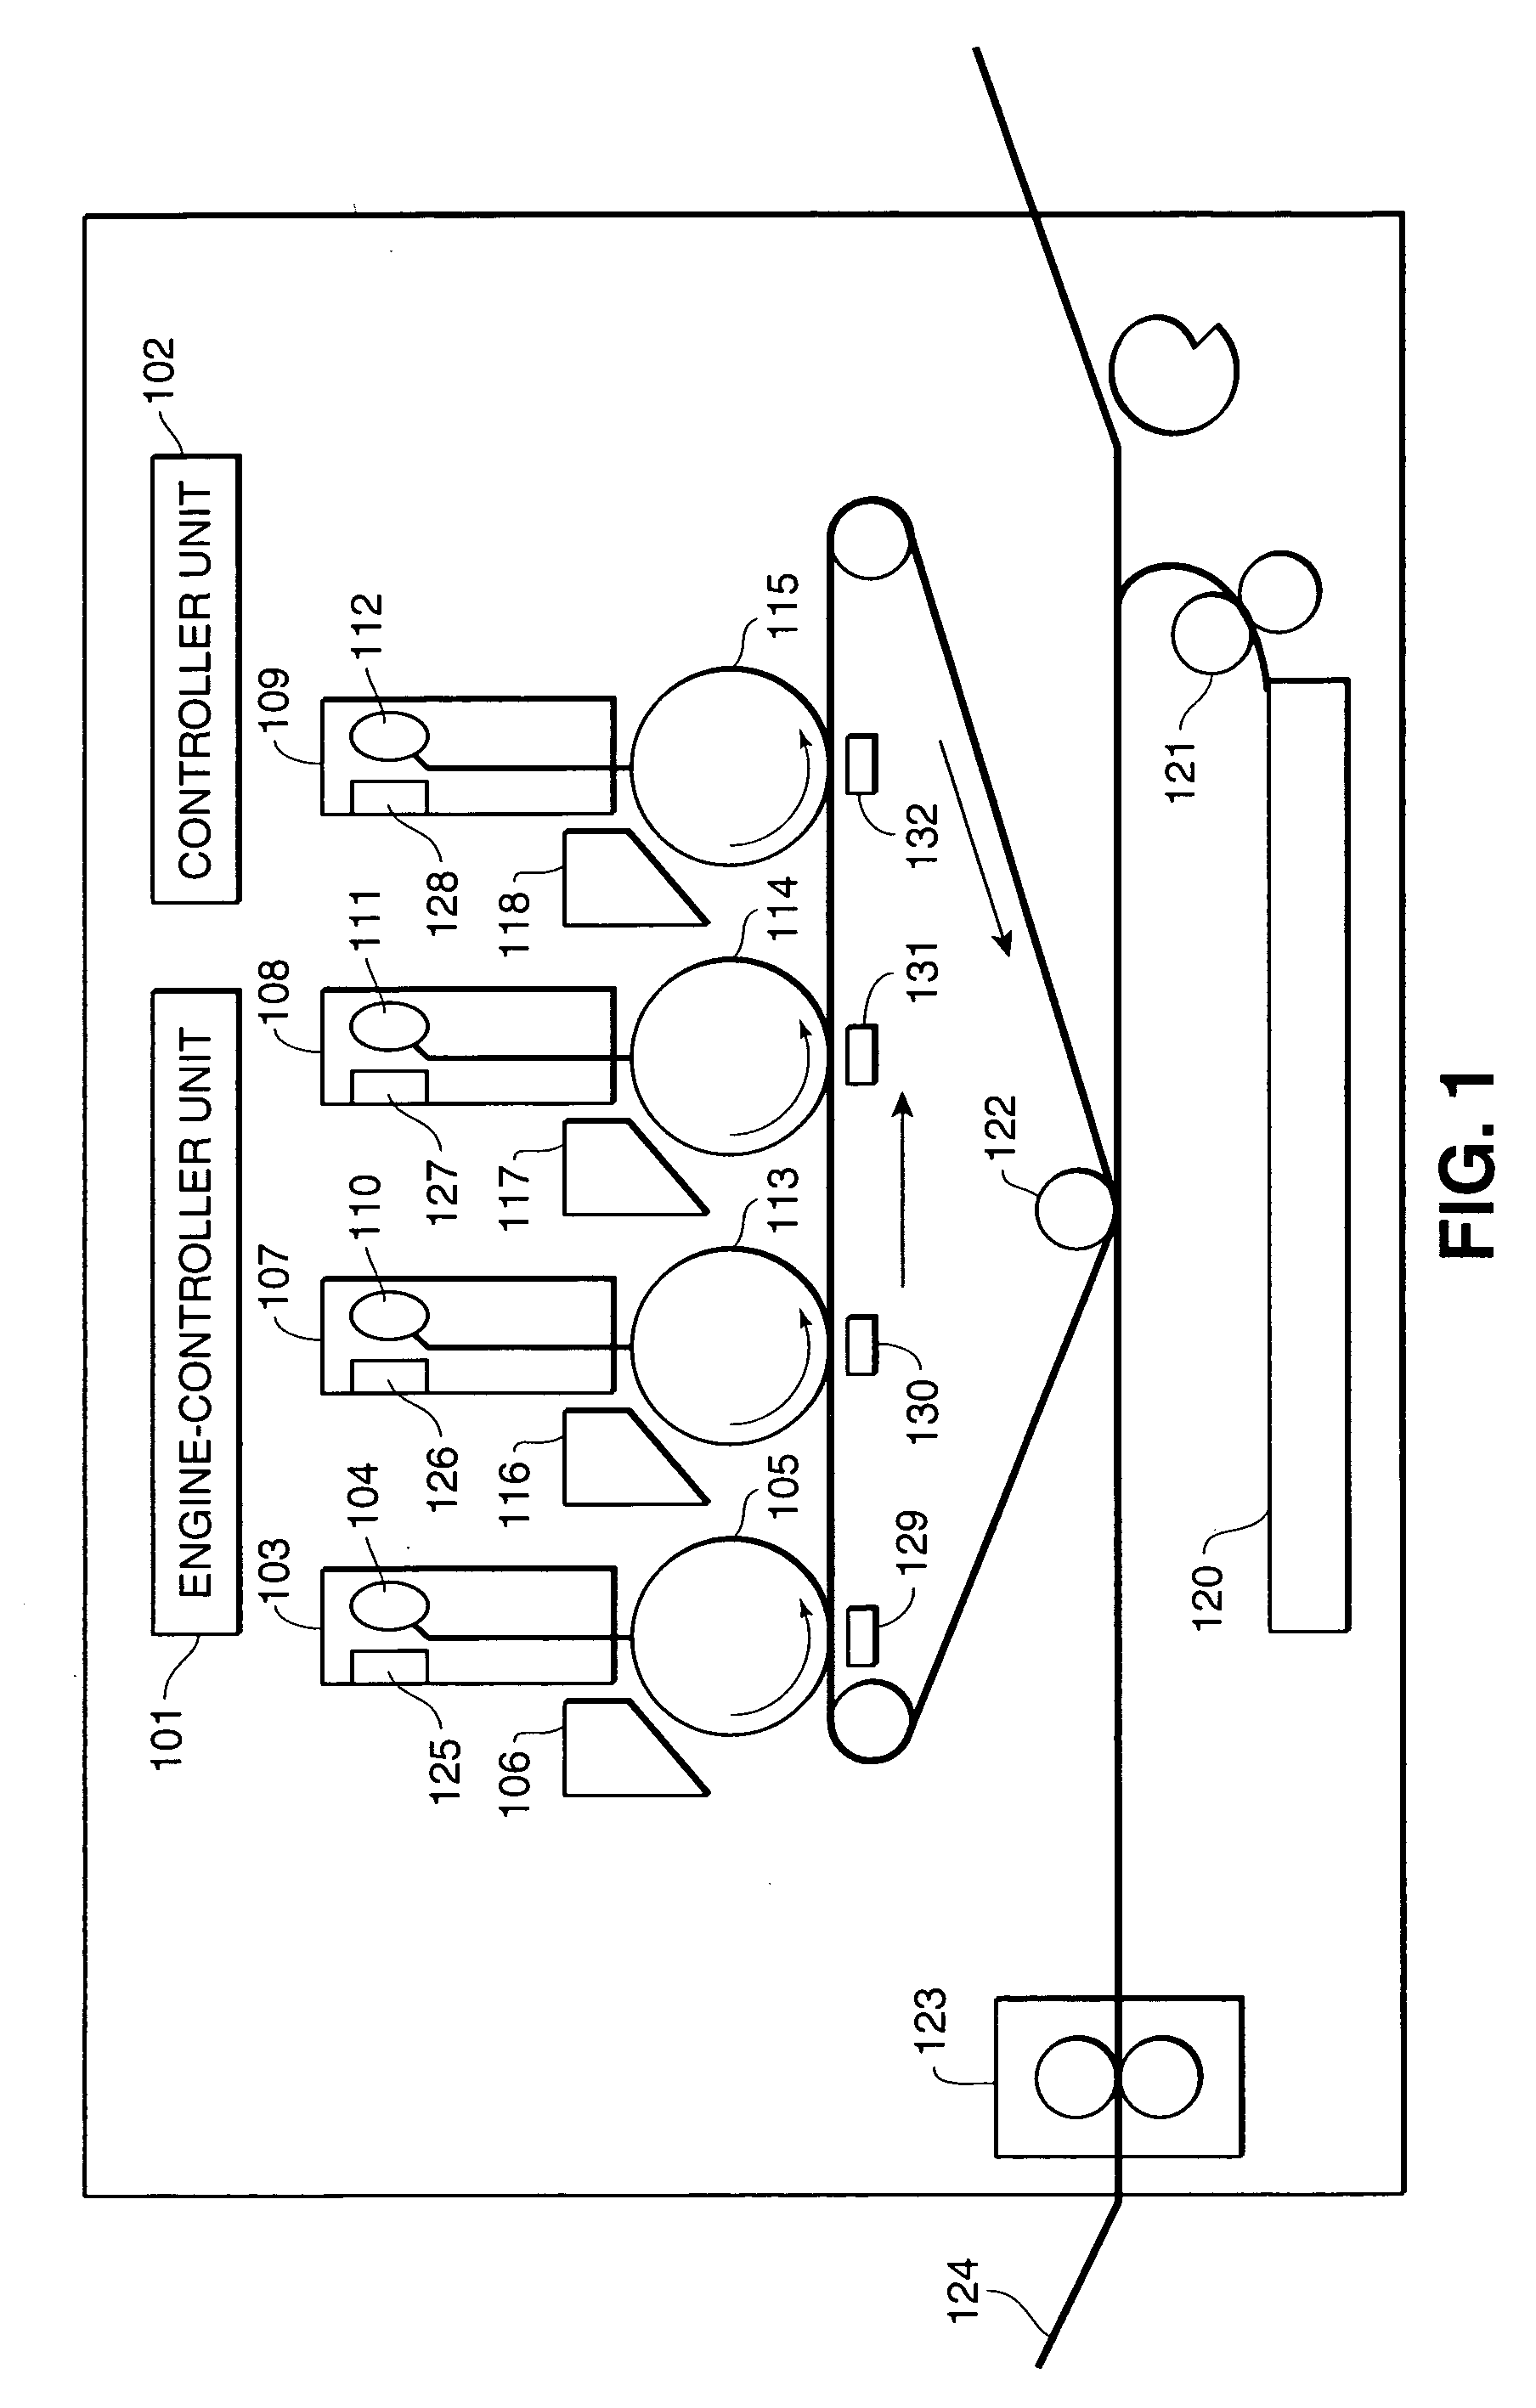 Efficient rasterization system and method